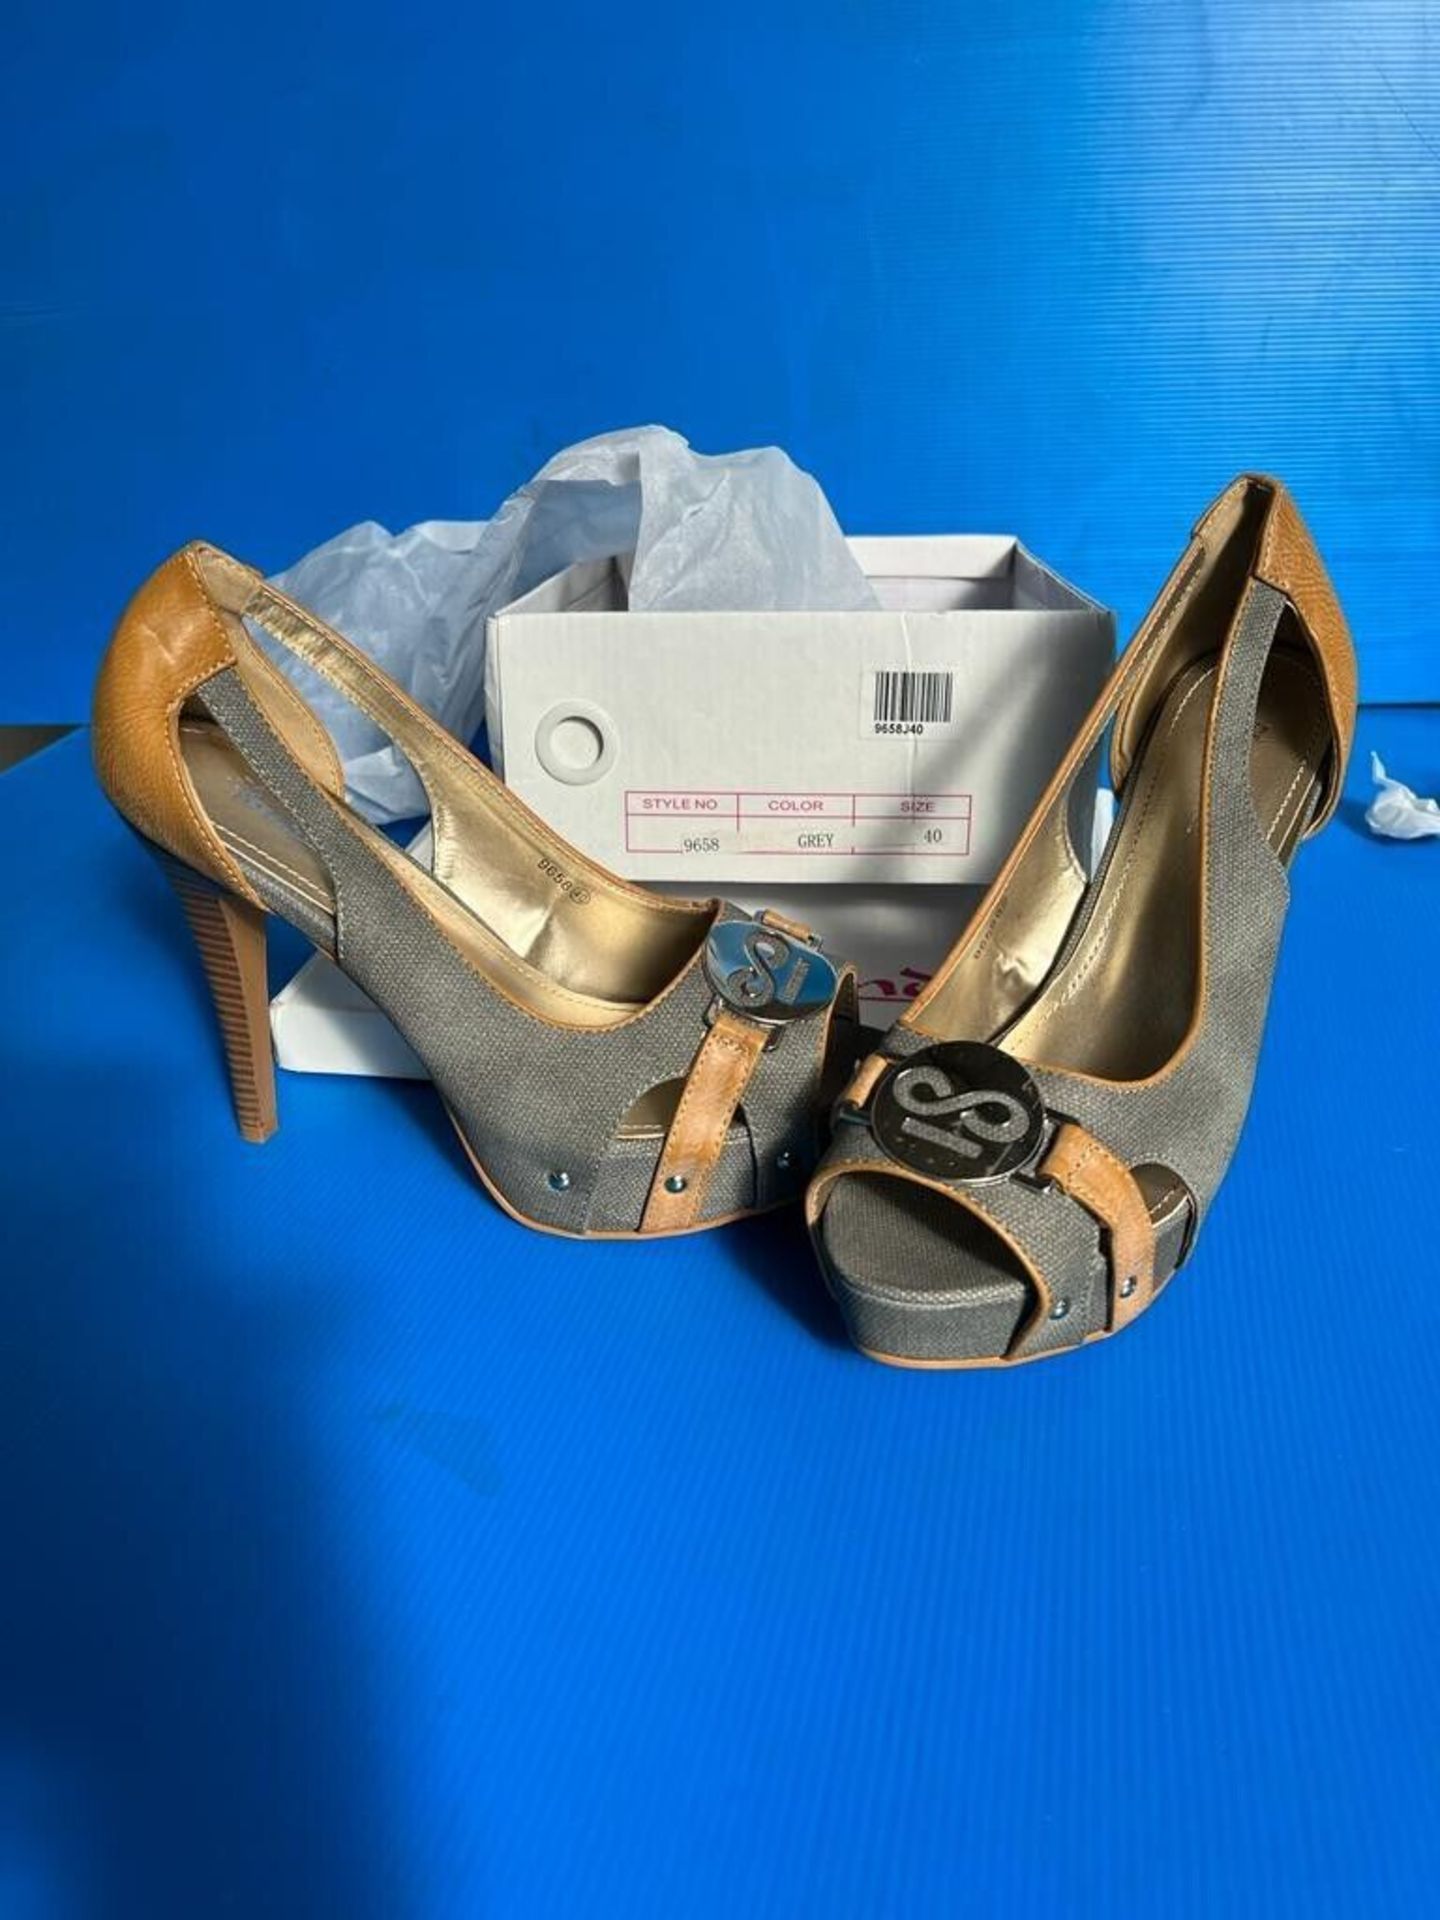 X100 BRAND NEW PAIRS WOMENS HIGH HEELS - MIXED STYLES AND SIZES RRP £3000 - Image 10 of 13